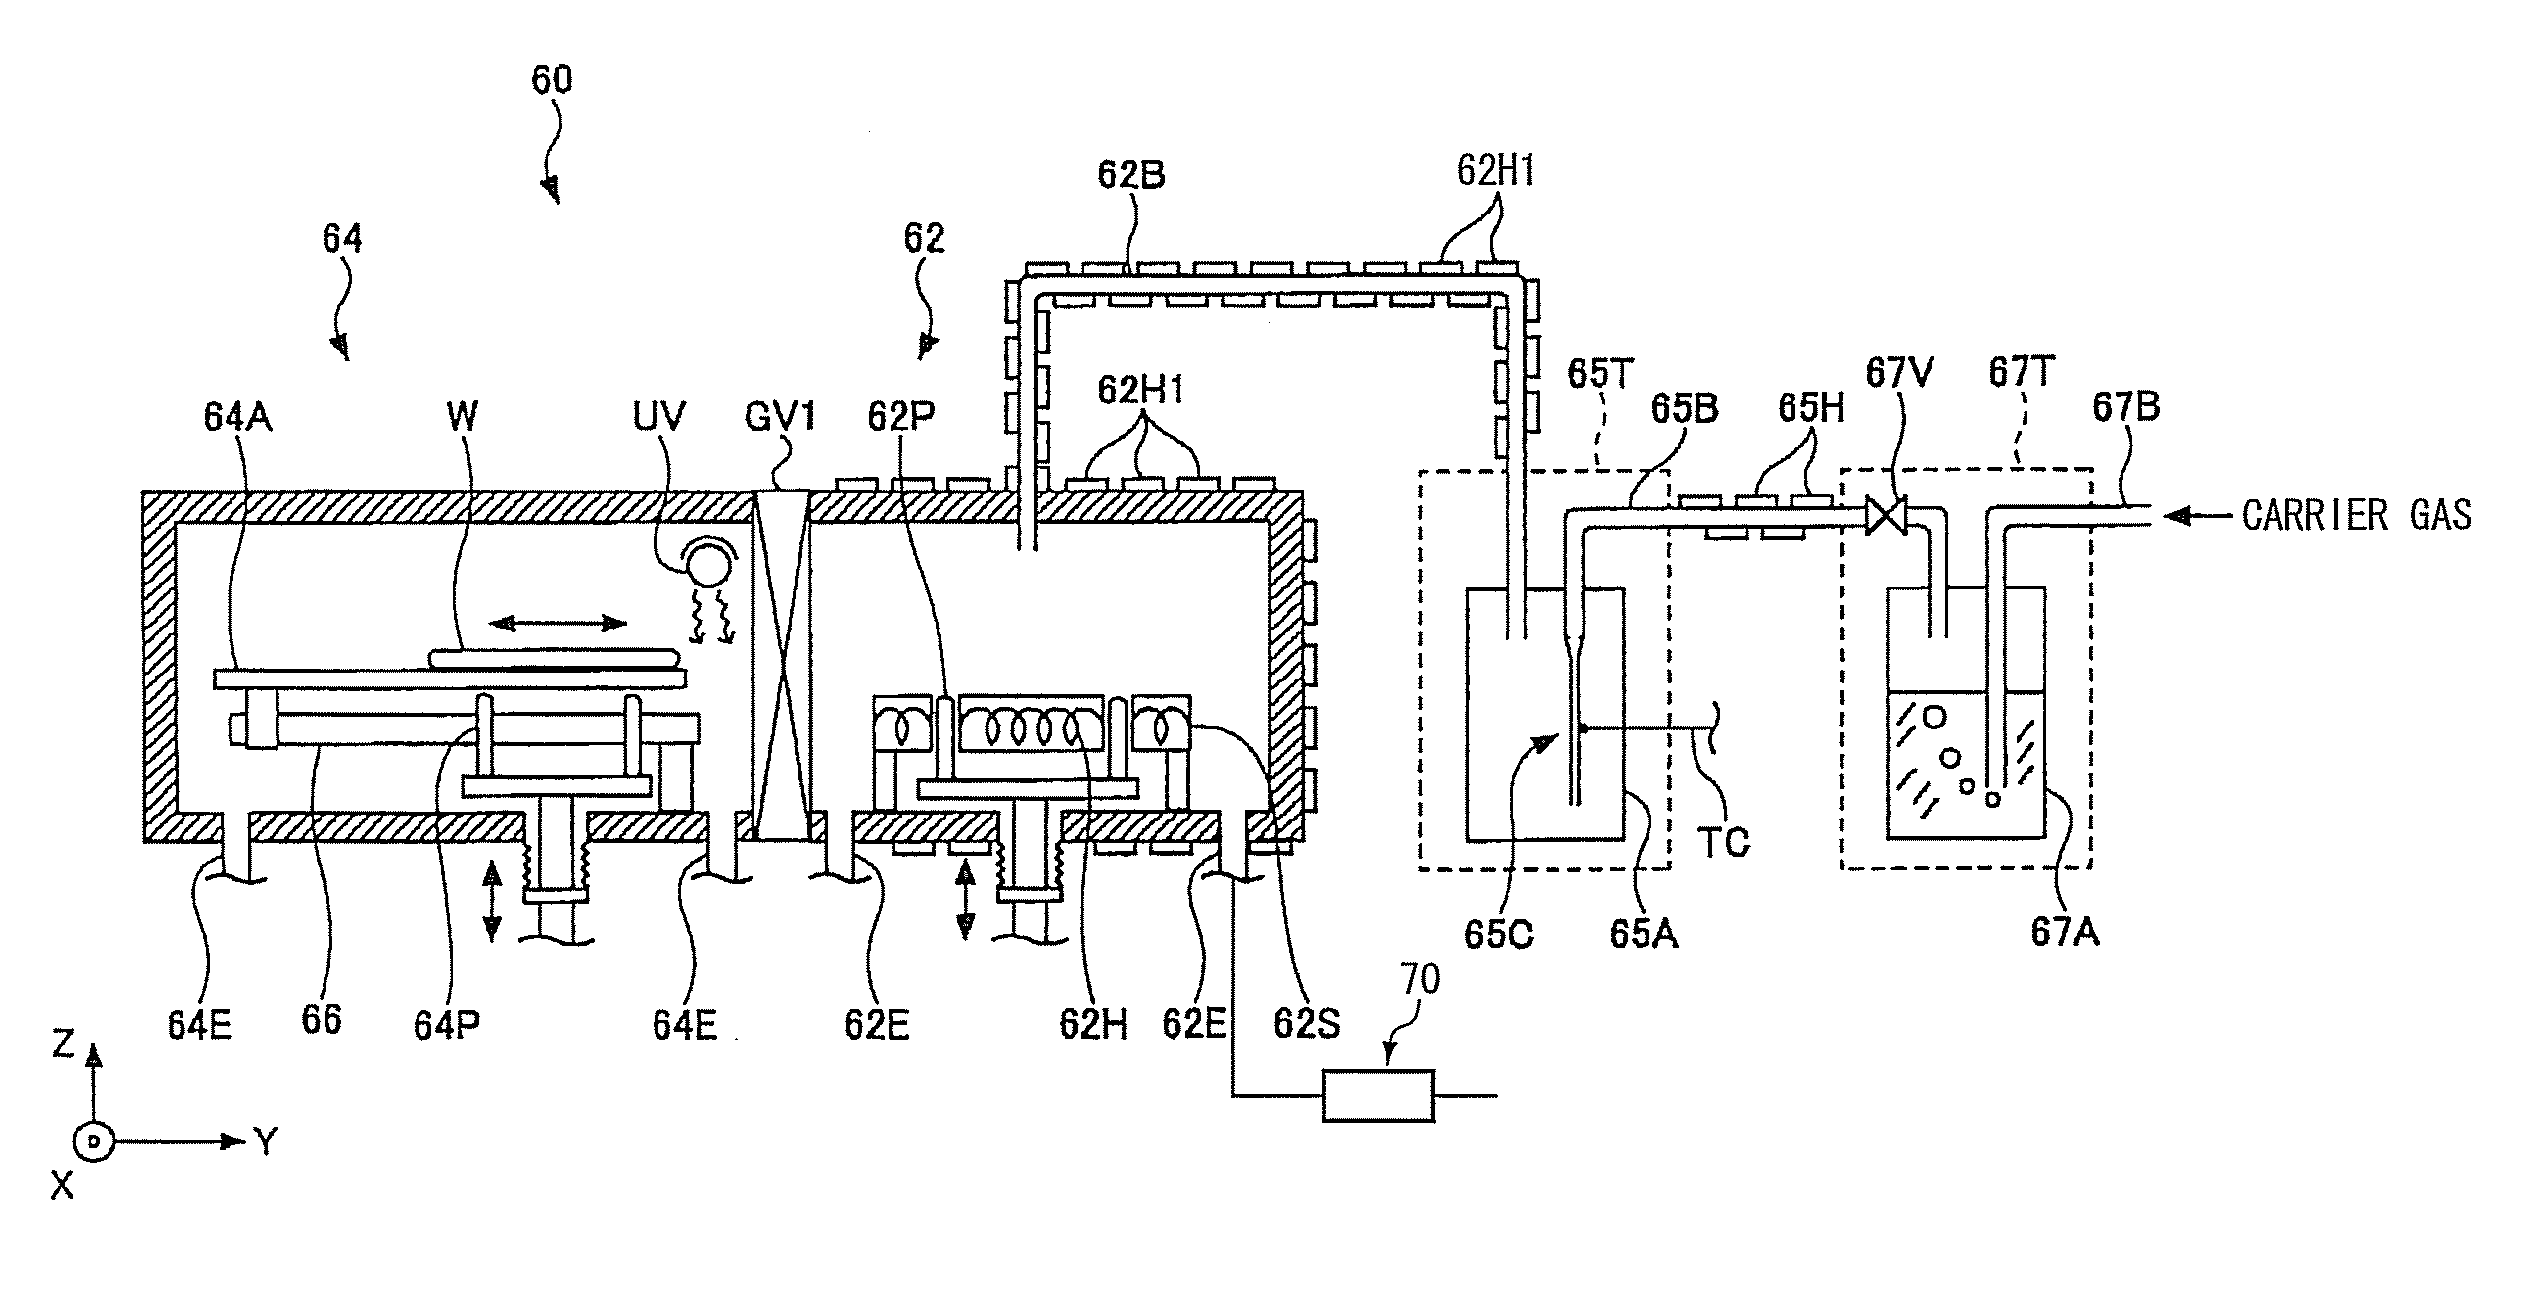 Resist coating and developing apparatus and method